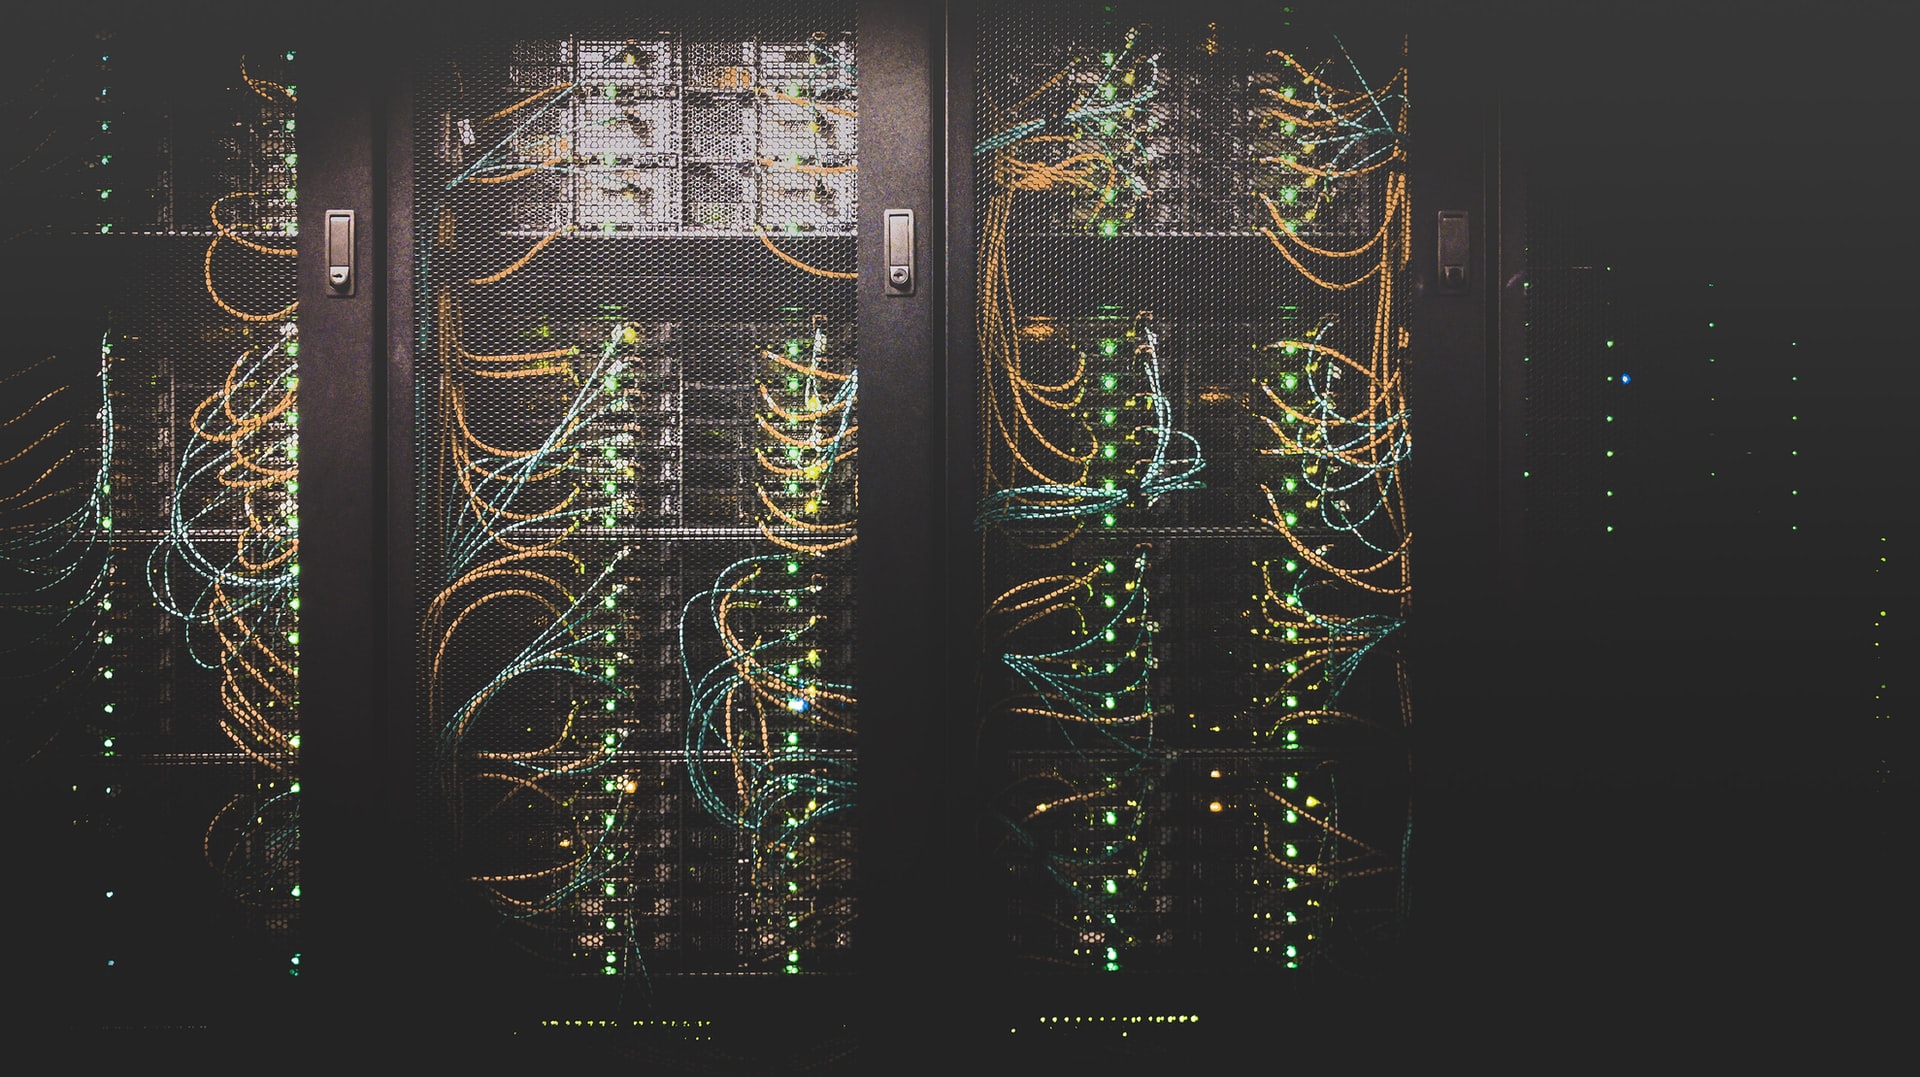 Servers connected with multiple cables on racks